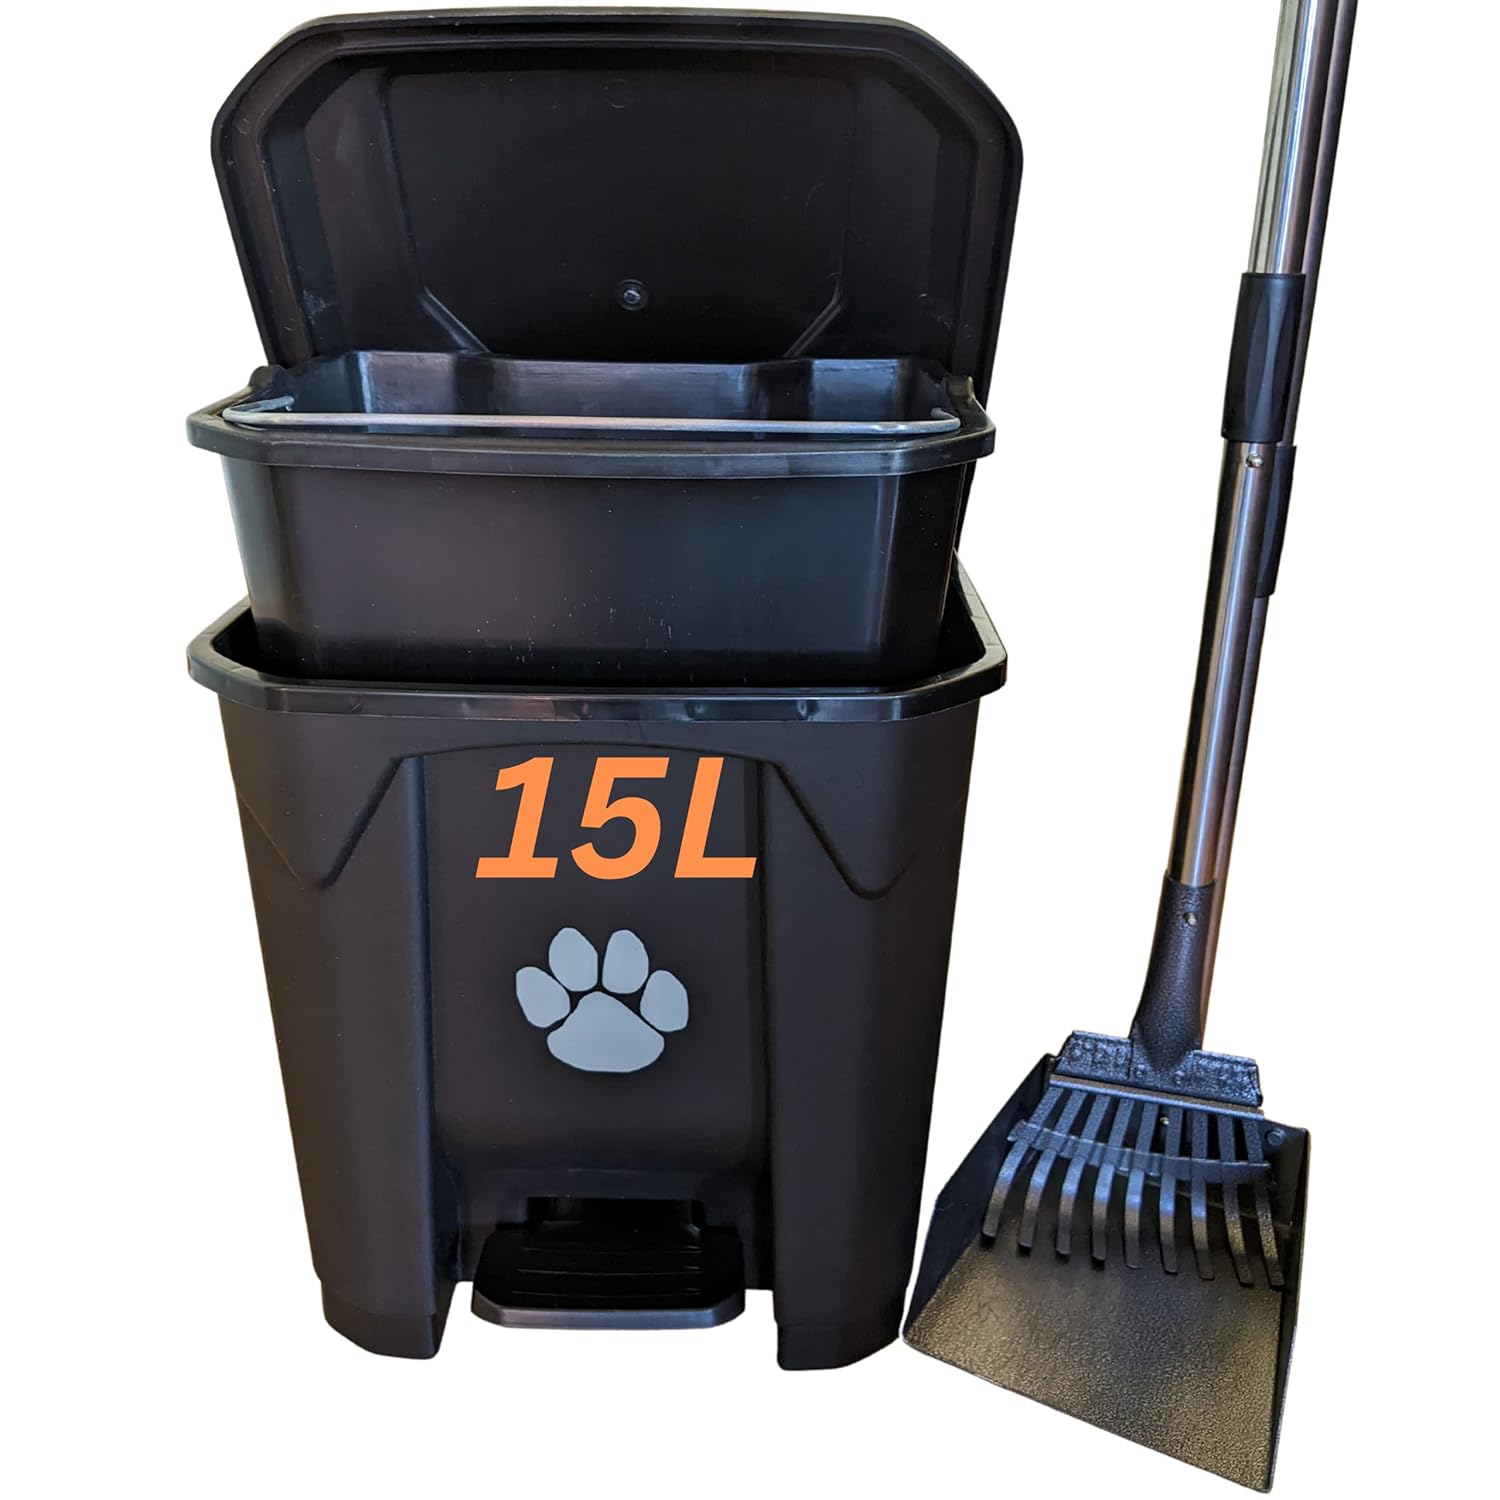 USA Fully Assembled Outdoor Dog Poop Trash Can with Lid and Removable Inner Waste Bin